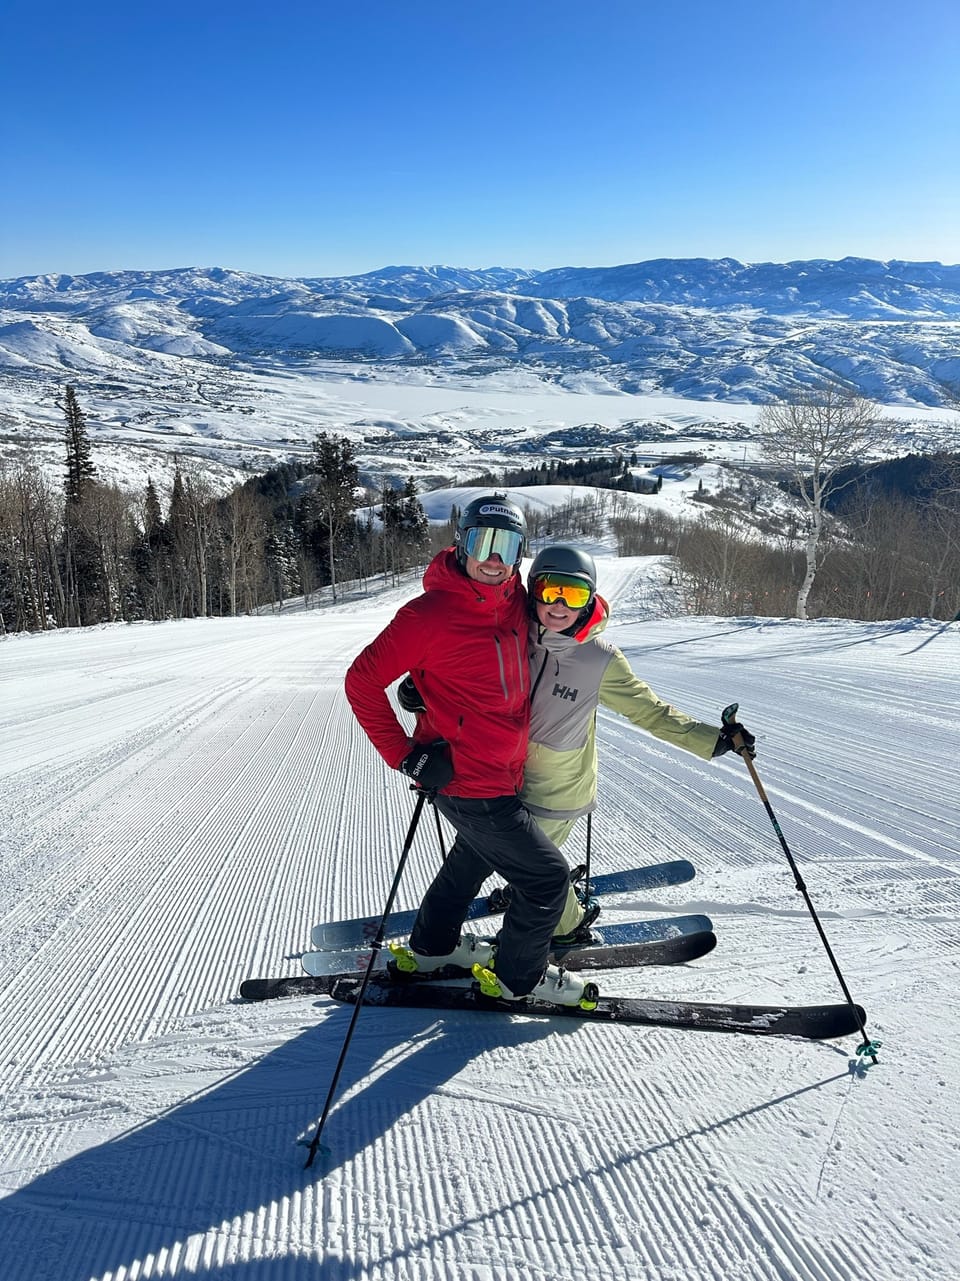 Utah’s Ski Area To More Than Double in Size To Become One of 5 Biggest in US